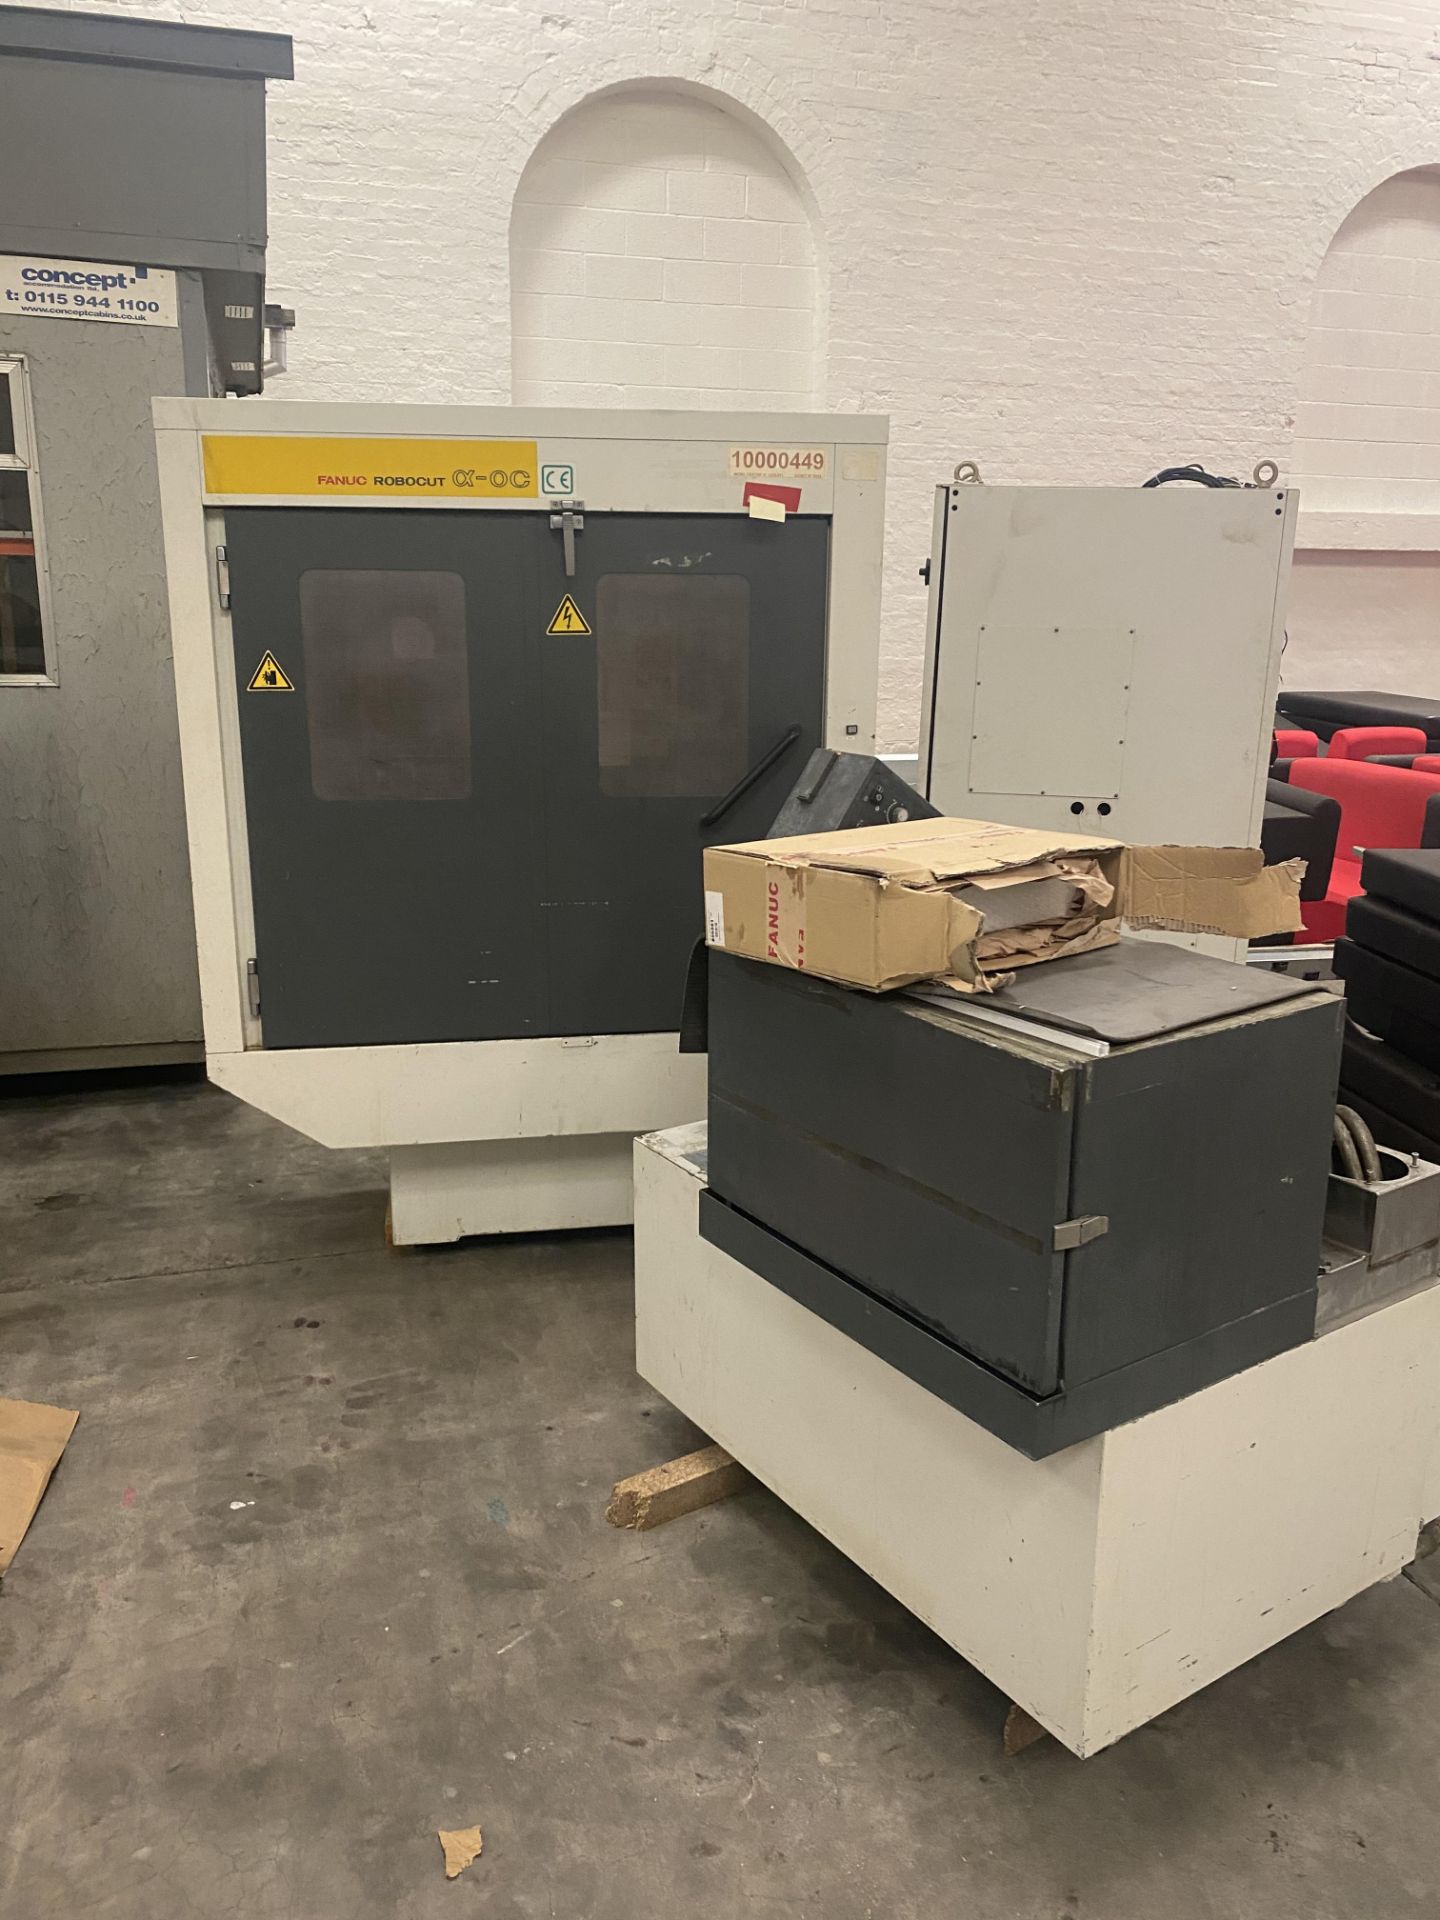 Fanuc Robocut Wire EDM Machine, year of manufacture 1996, free loading onto purchasers transport -